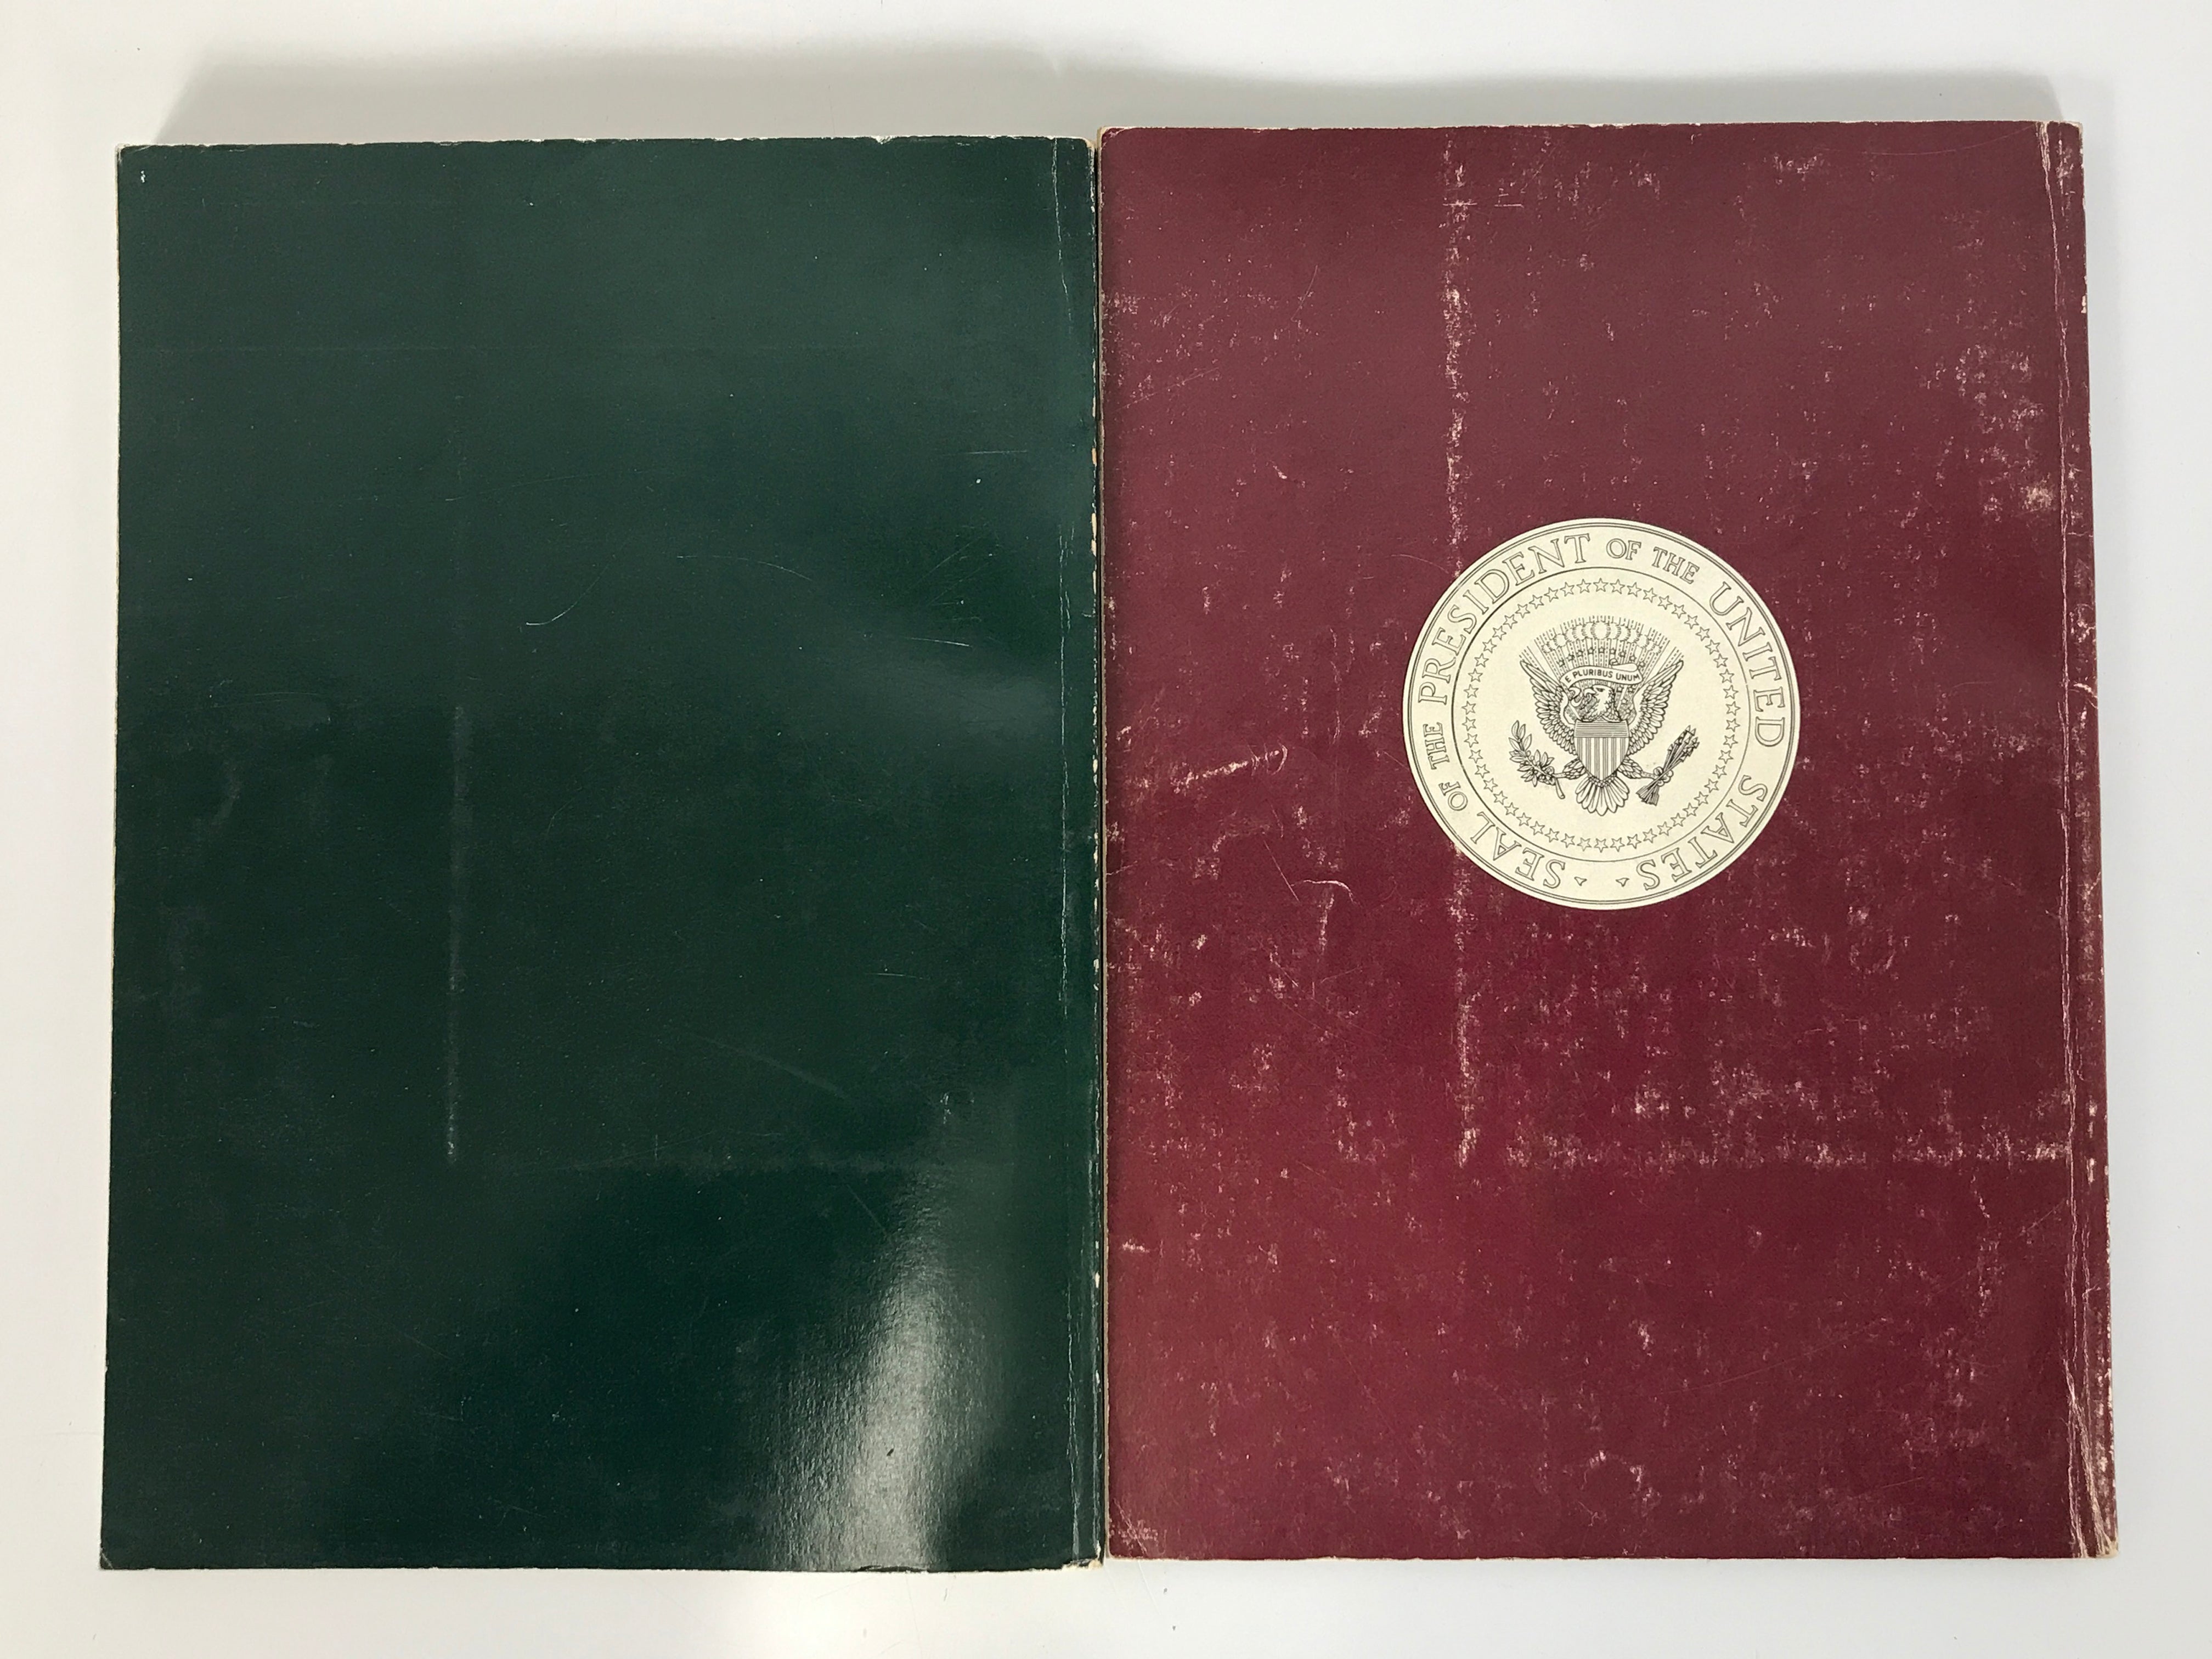 Lot of 2: The Presidents of the U.S.A. and The Living White House (1970) SC White House Historical Association